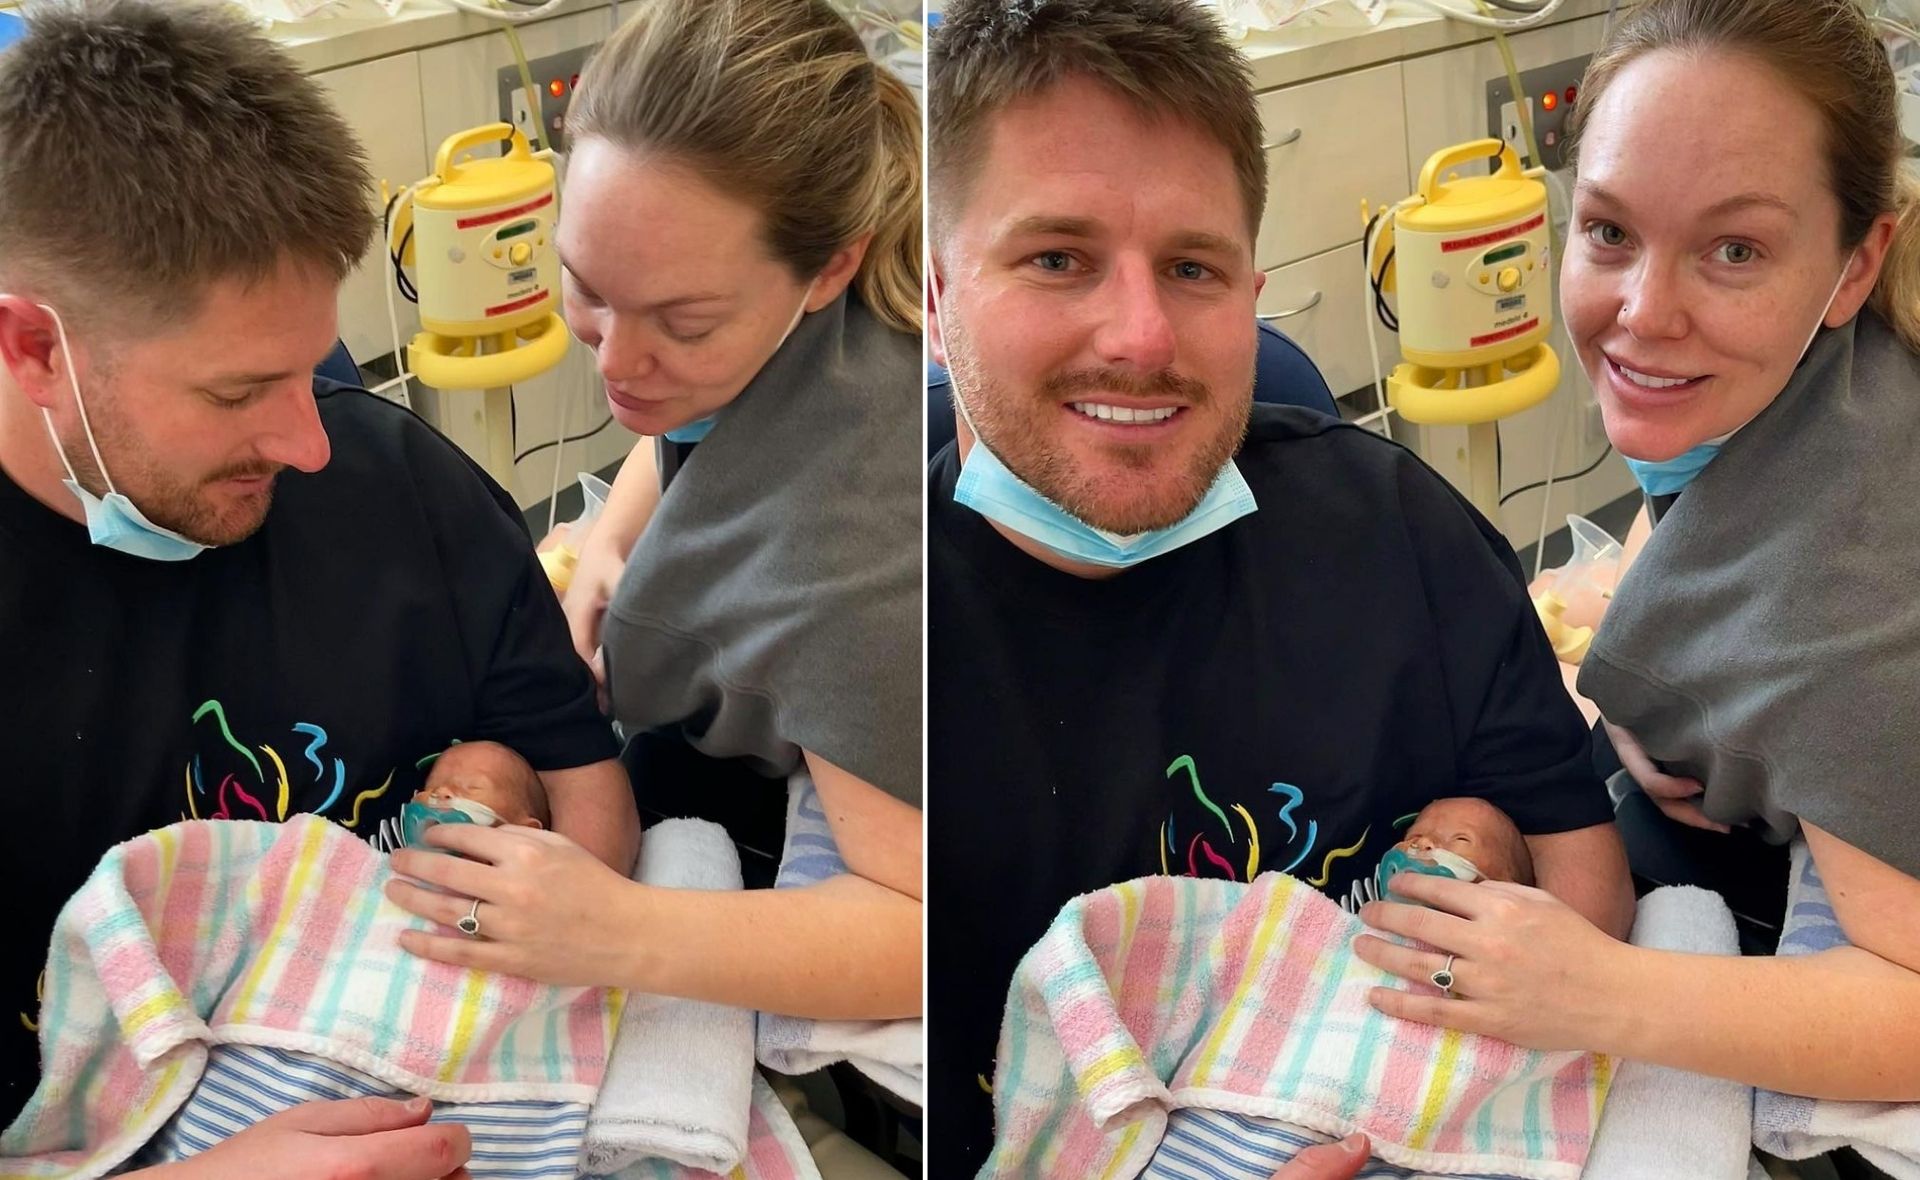 MAFS’ Bryce Ruthven and Melissa Rawson reveal their premature twins have been tested for COVID and are now in isolation